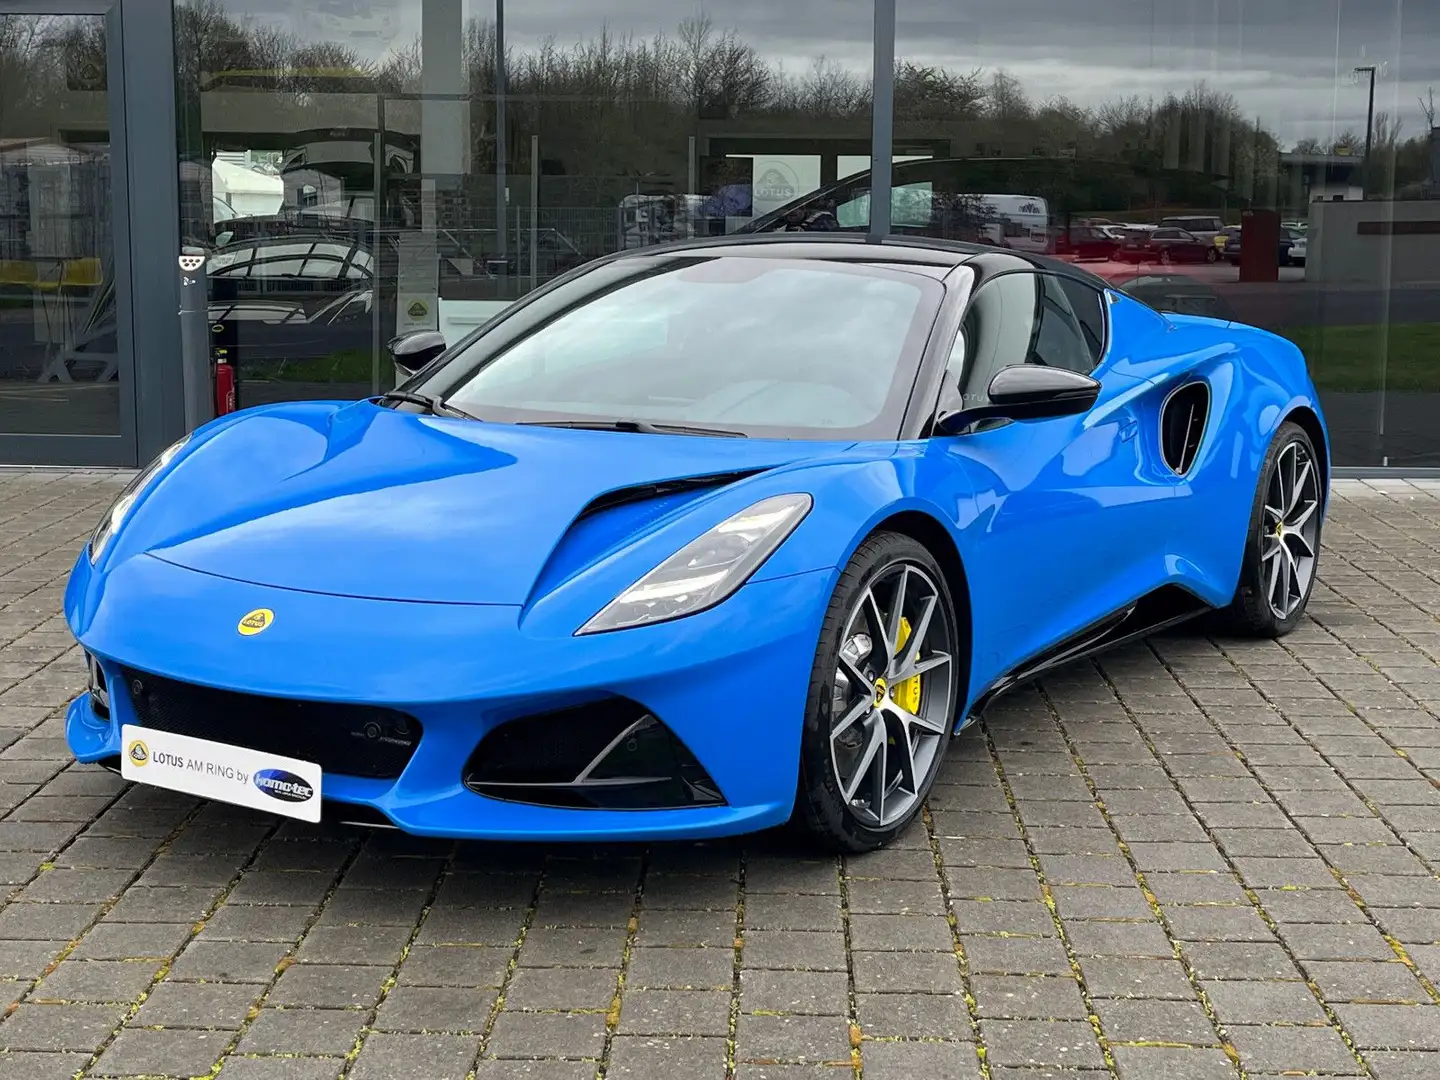 Lotus Emira I4 DCT "First Edition" by Lotus am Ring Blauw - 1